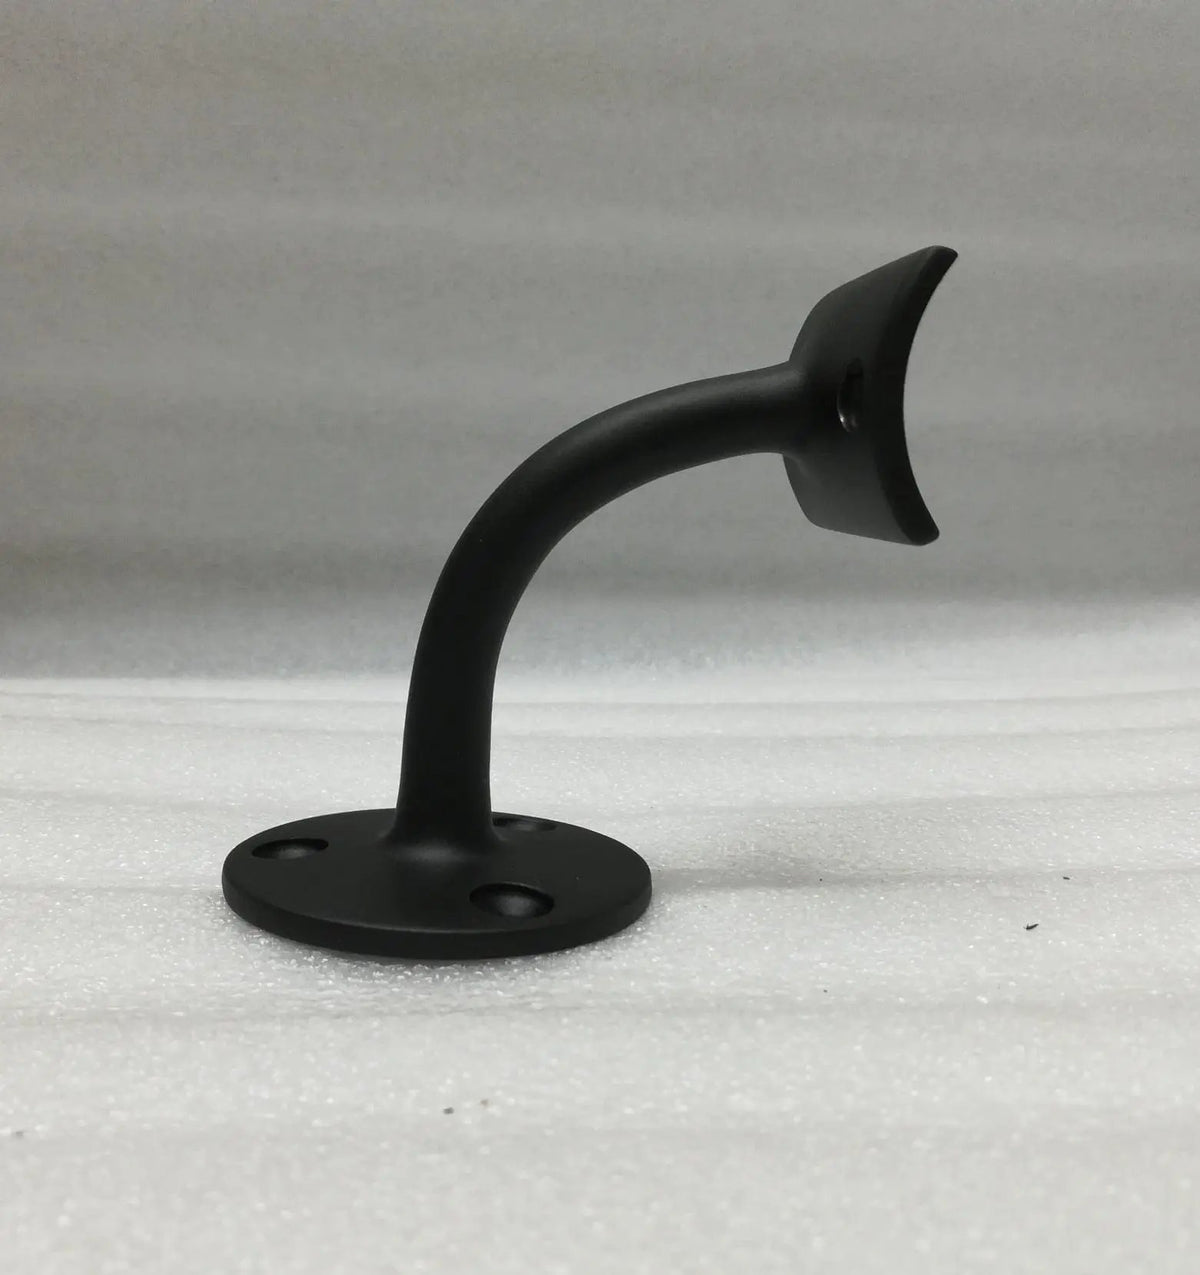 3-Screw Hand Rail Bracket for 2" Tubing Brackets, Components for 2" Od Tubing MatteBlackPowderCoatedFinish-Pleasecall Trade Diversified